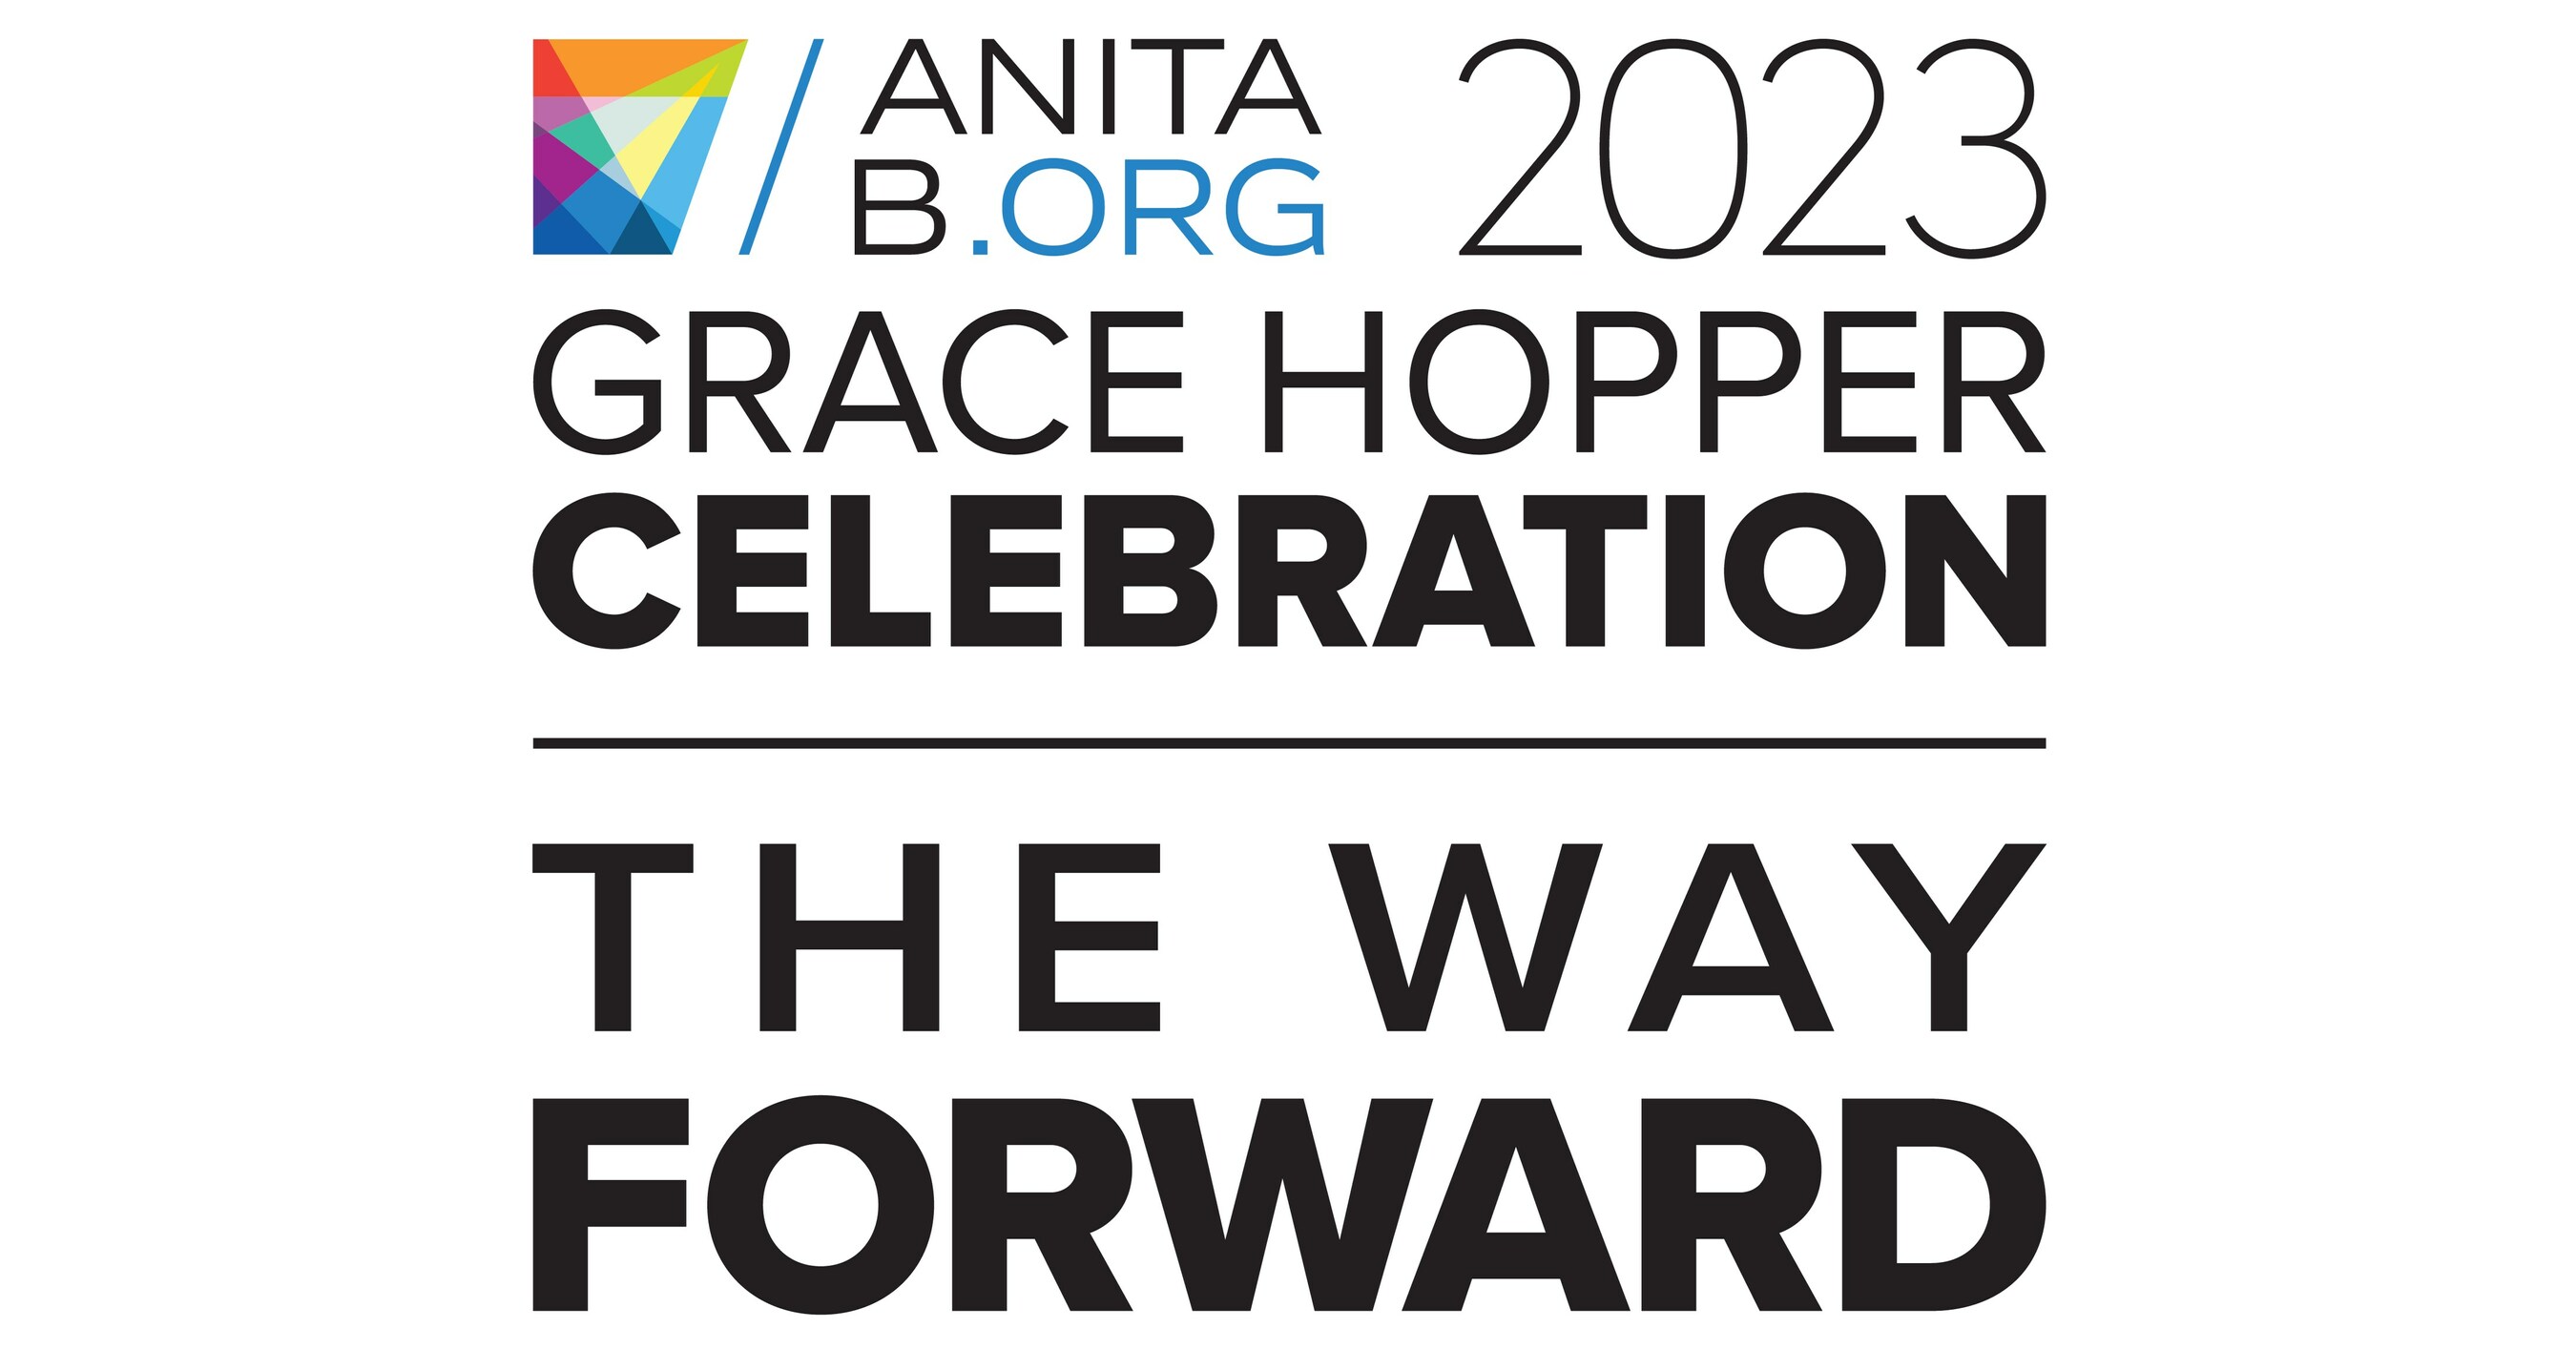 AnitaB.org Announces Registration for Grace Hopper Celebration, the World's  Largest Gathering for Women and Non-Binary Technologists, Opens July 18,  2023